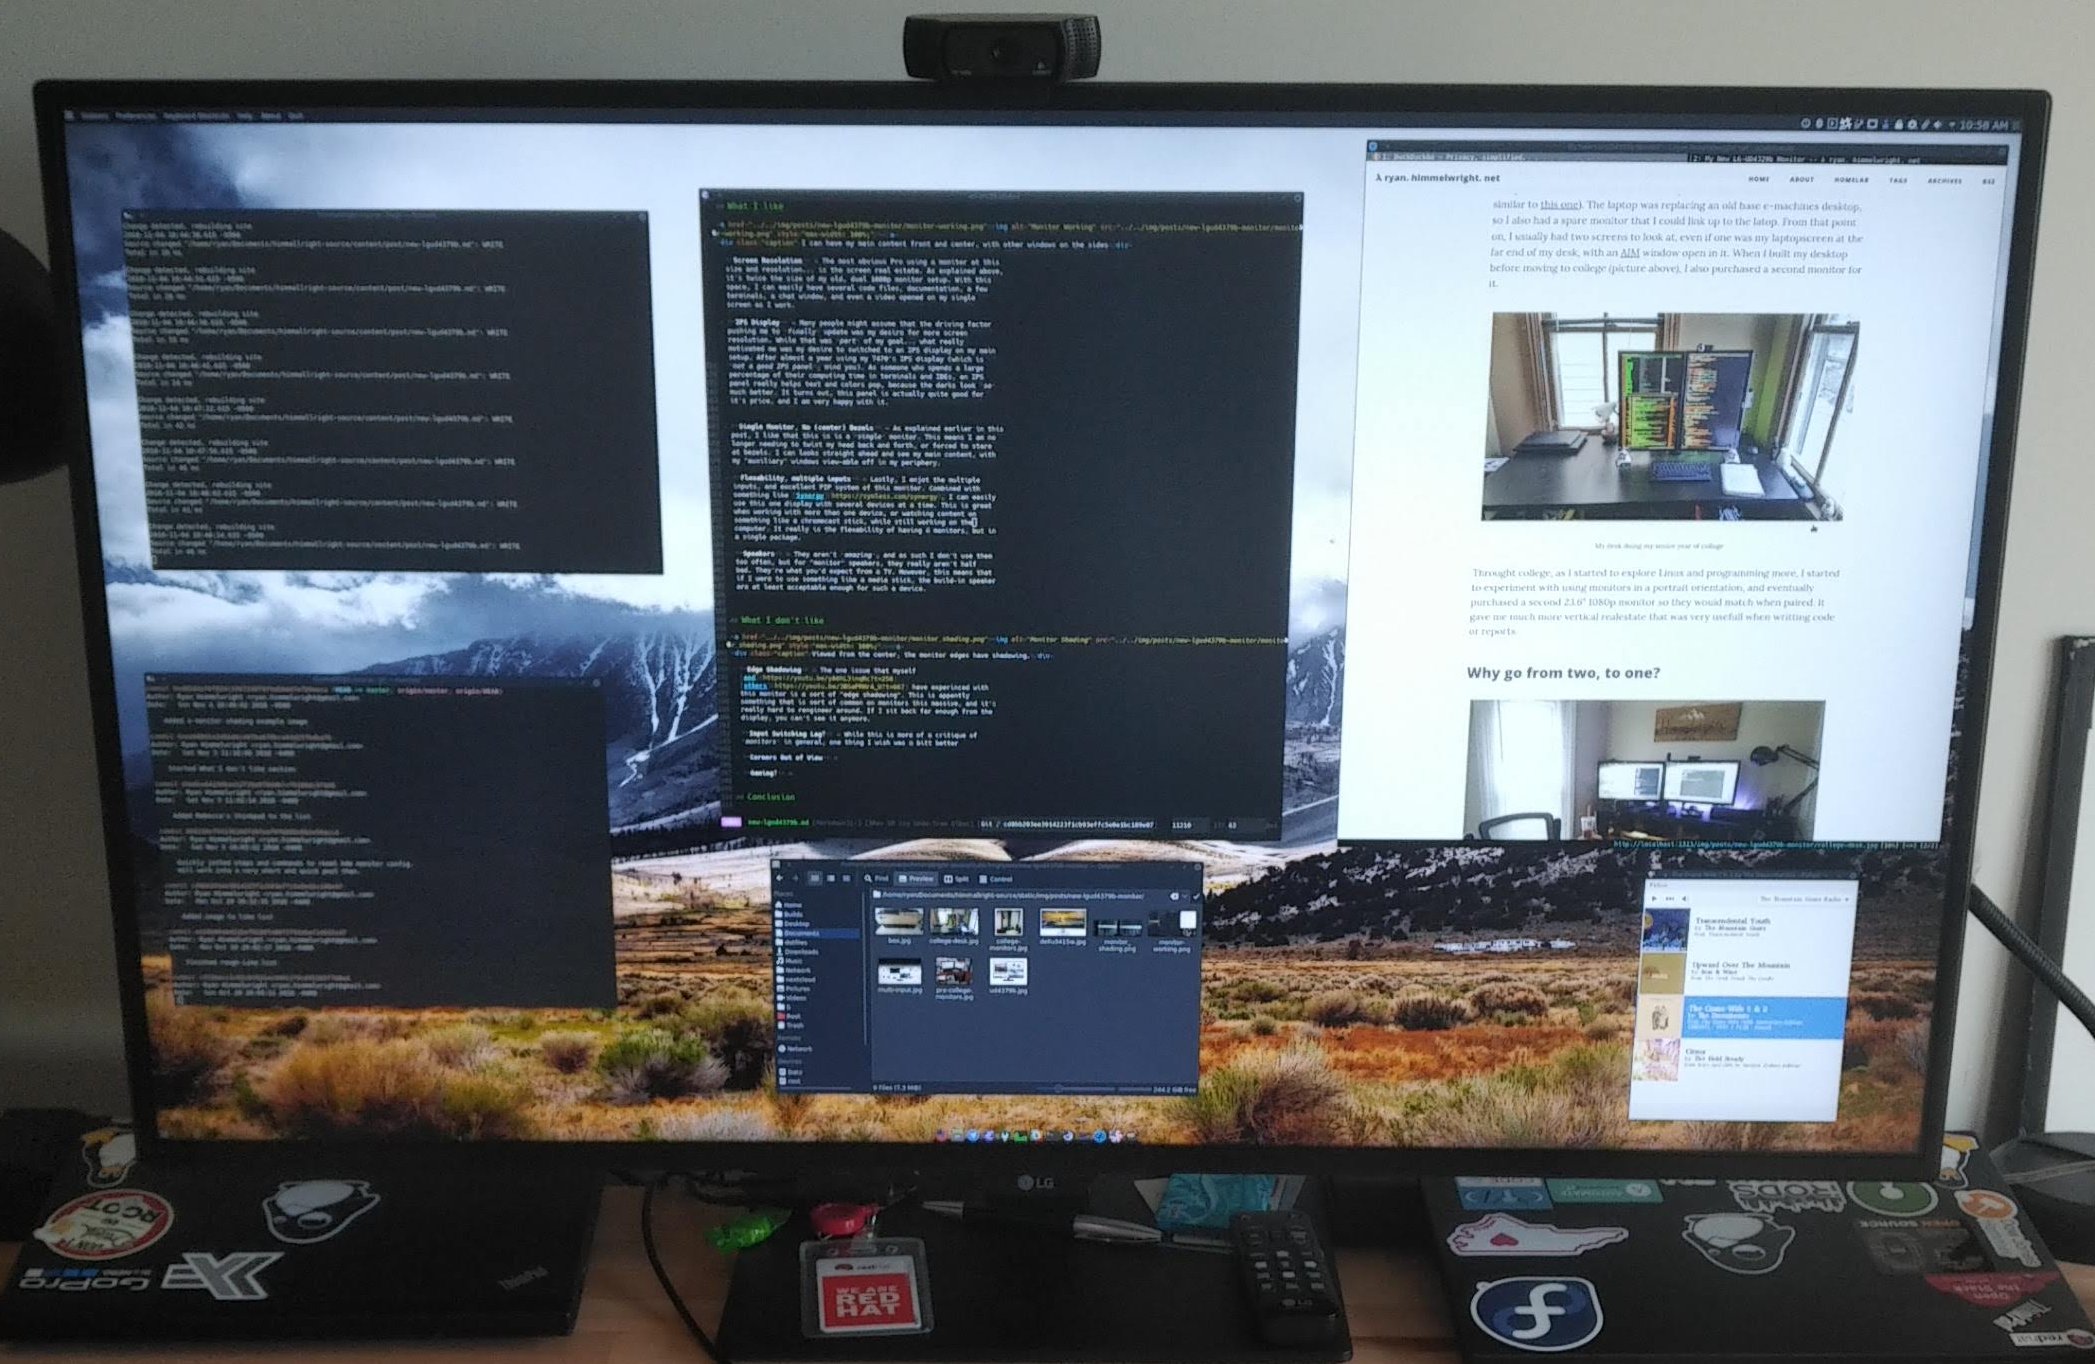 Filling up the monitor’s space